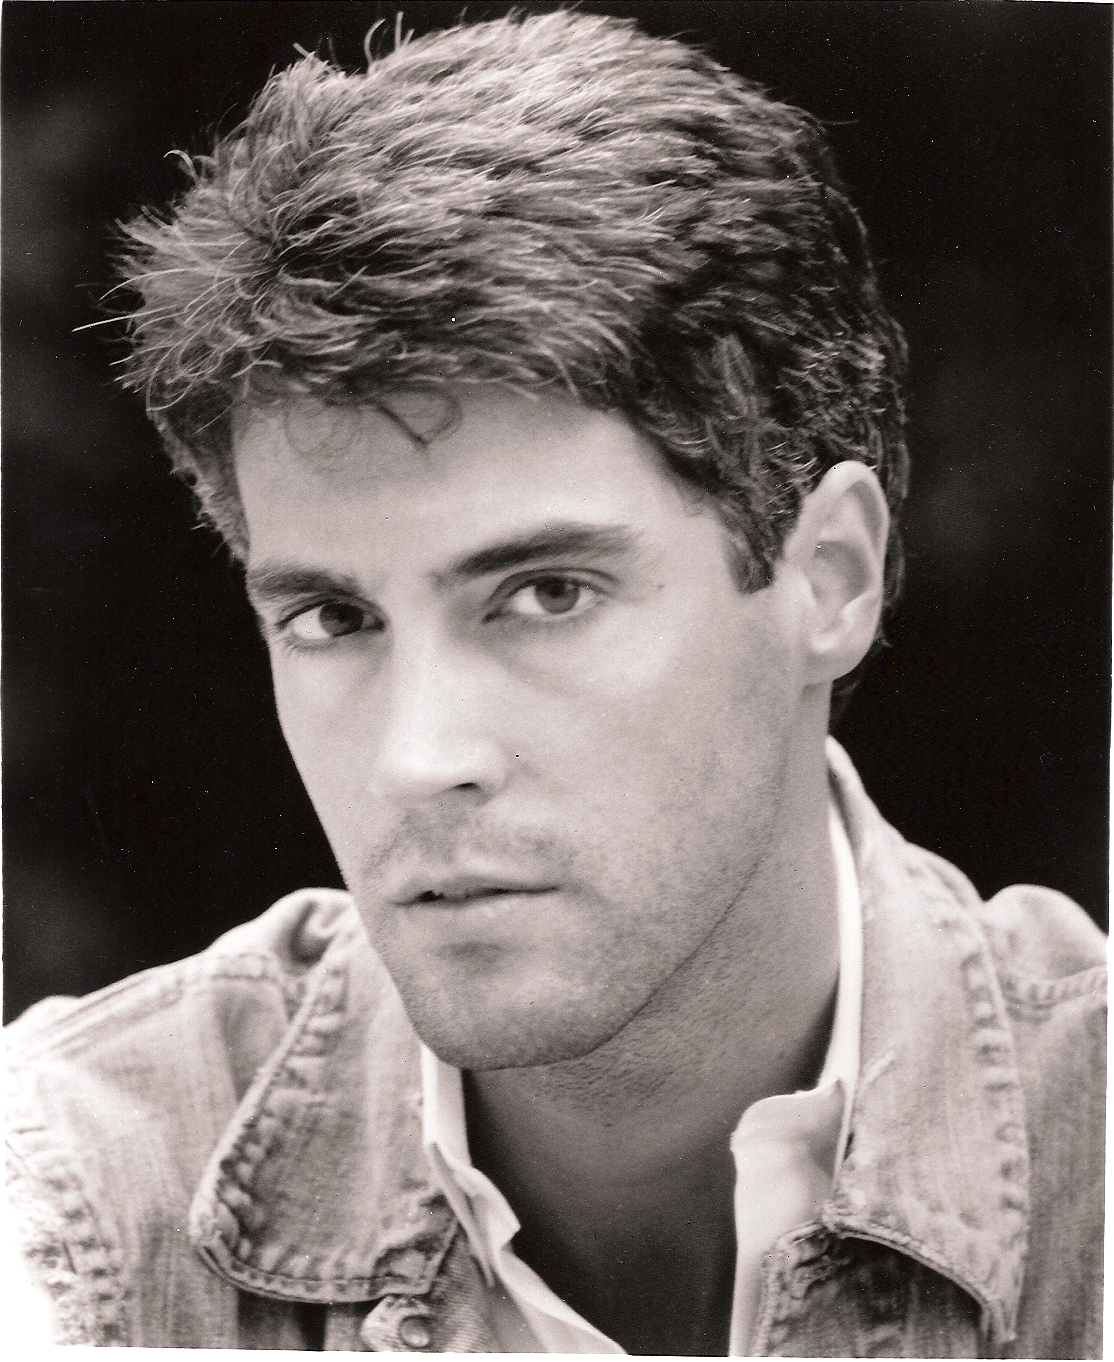 Singer and dancer Mark Knowles